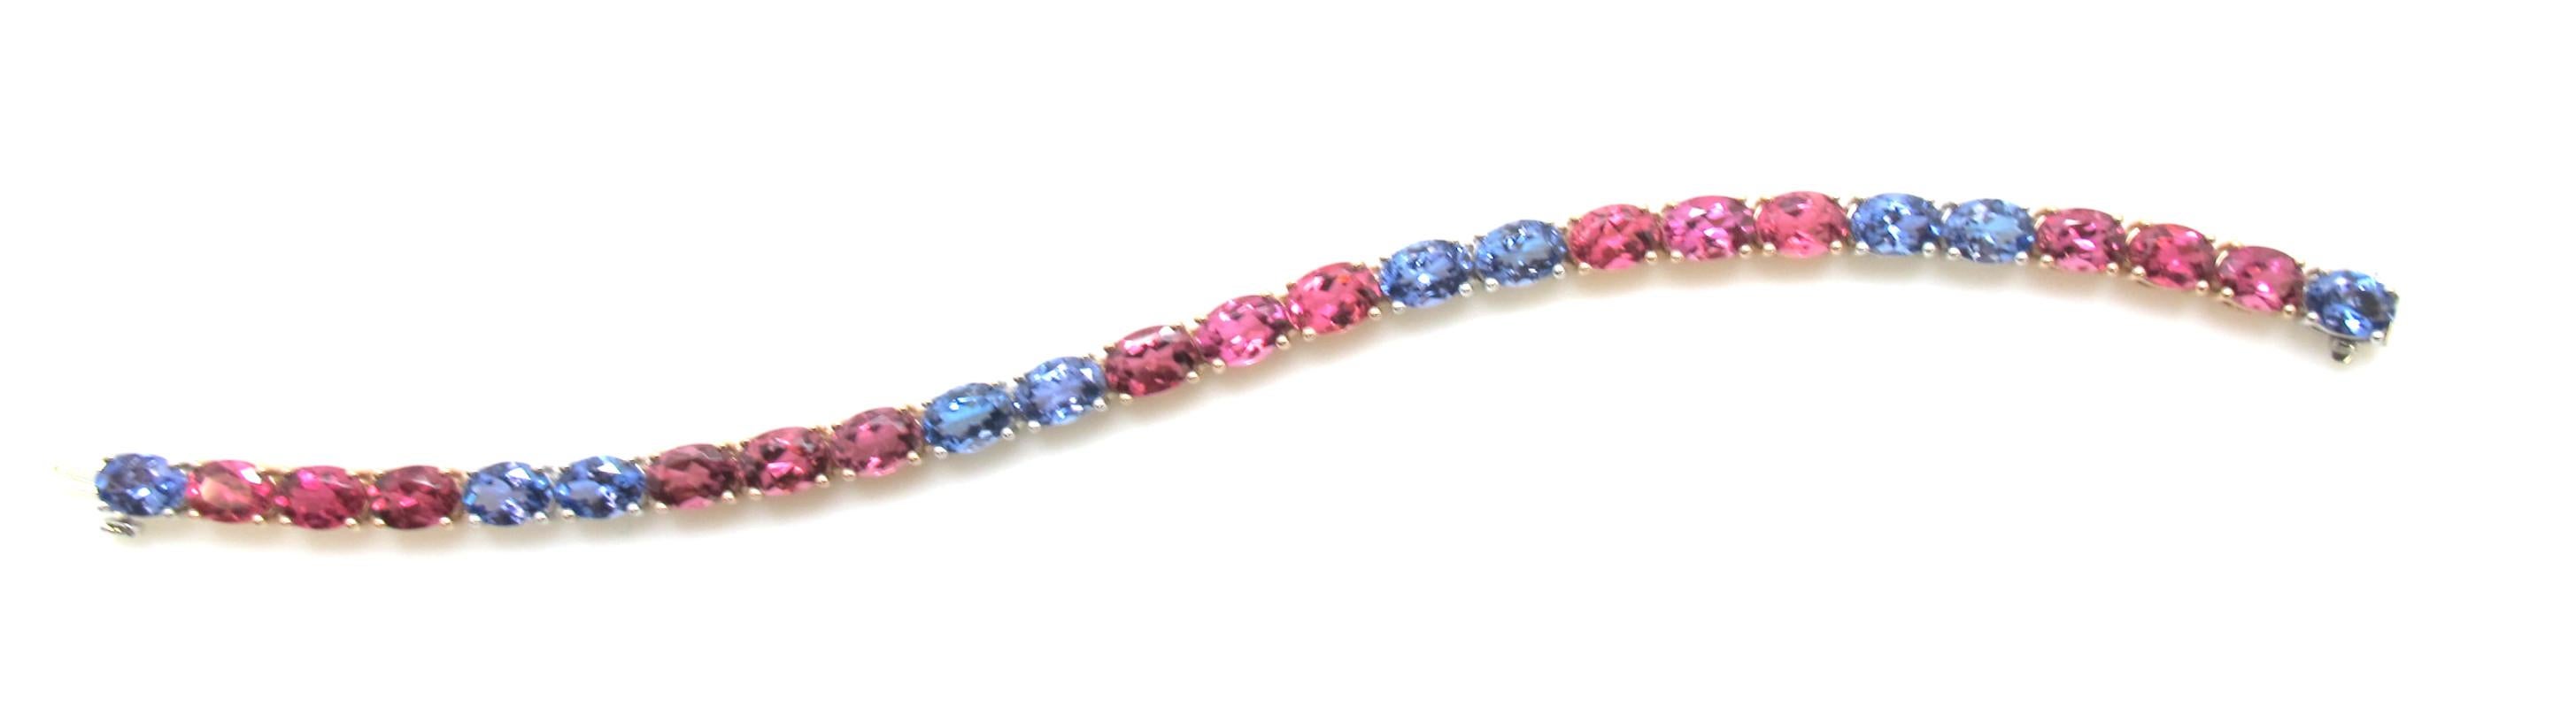 Oval Cut Tanzanite and Pink Tourmaline Tennis Bracelet in White and Rose Gold For Sale